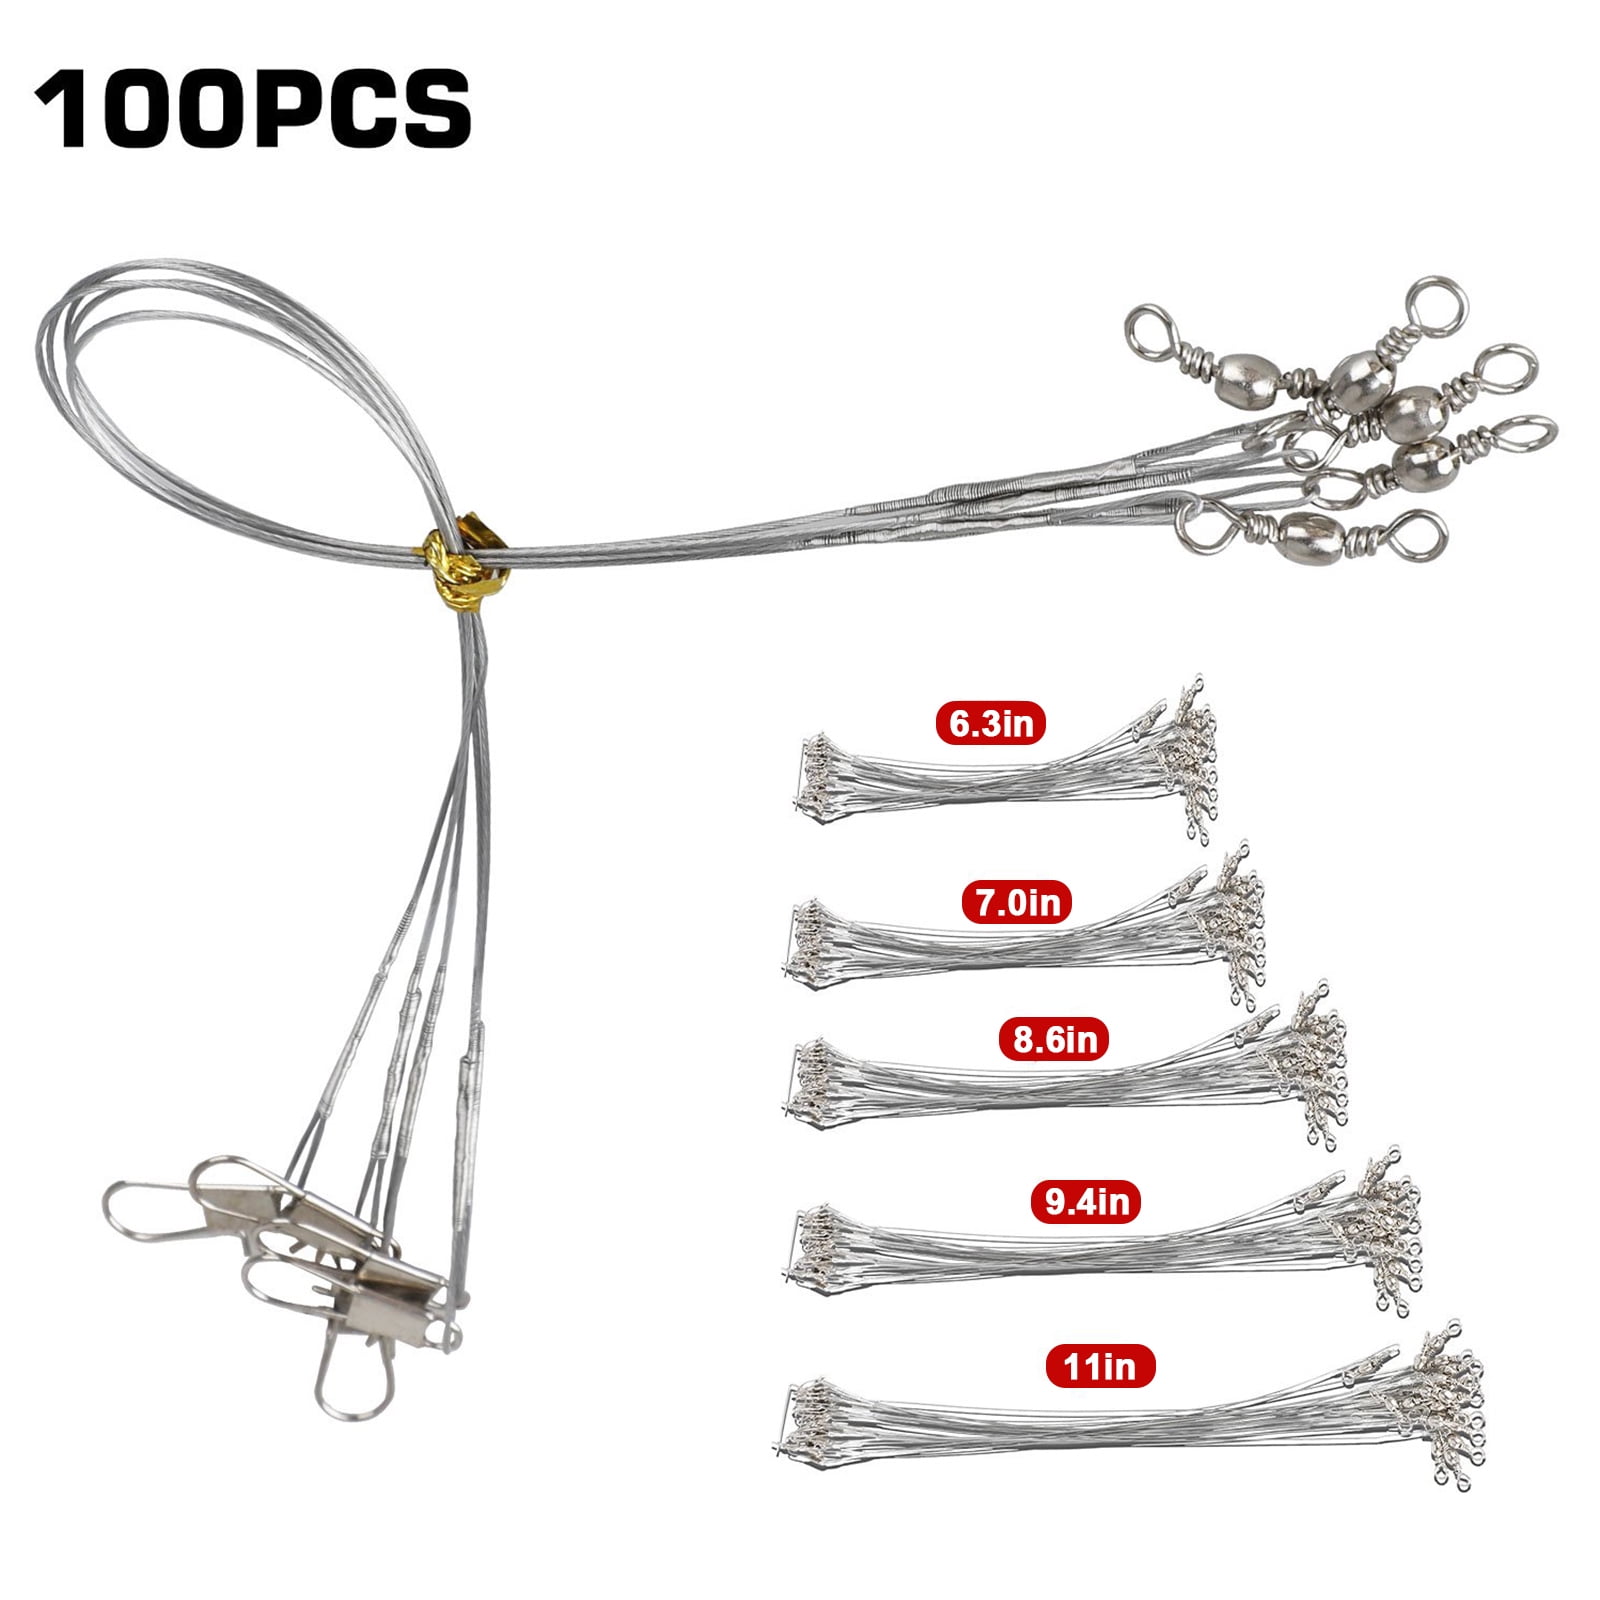 30pcs Stainless Steel Wire Line Leader Rig Barrel Swivel Snap Sea Surf Fishing 